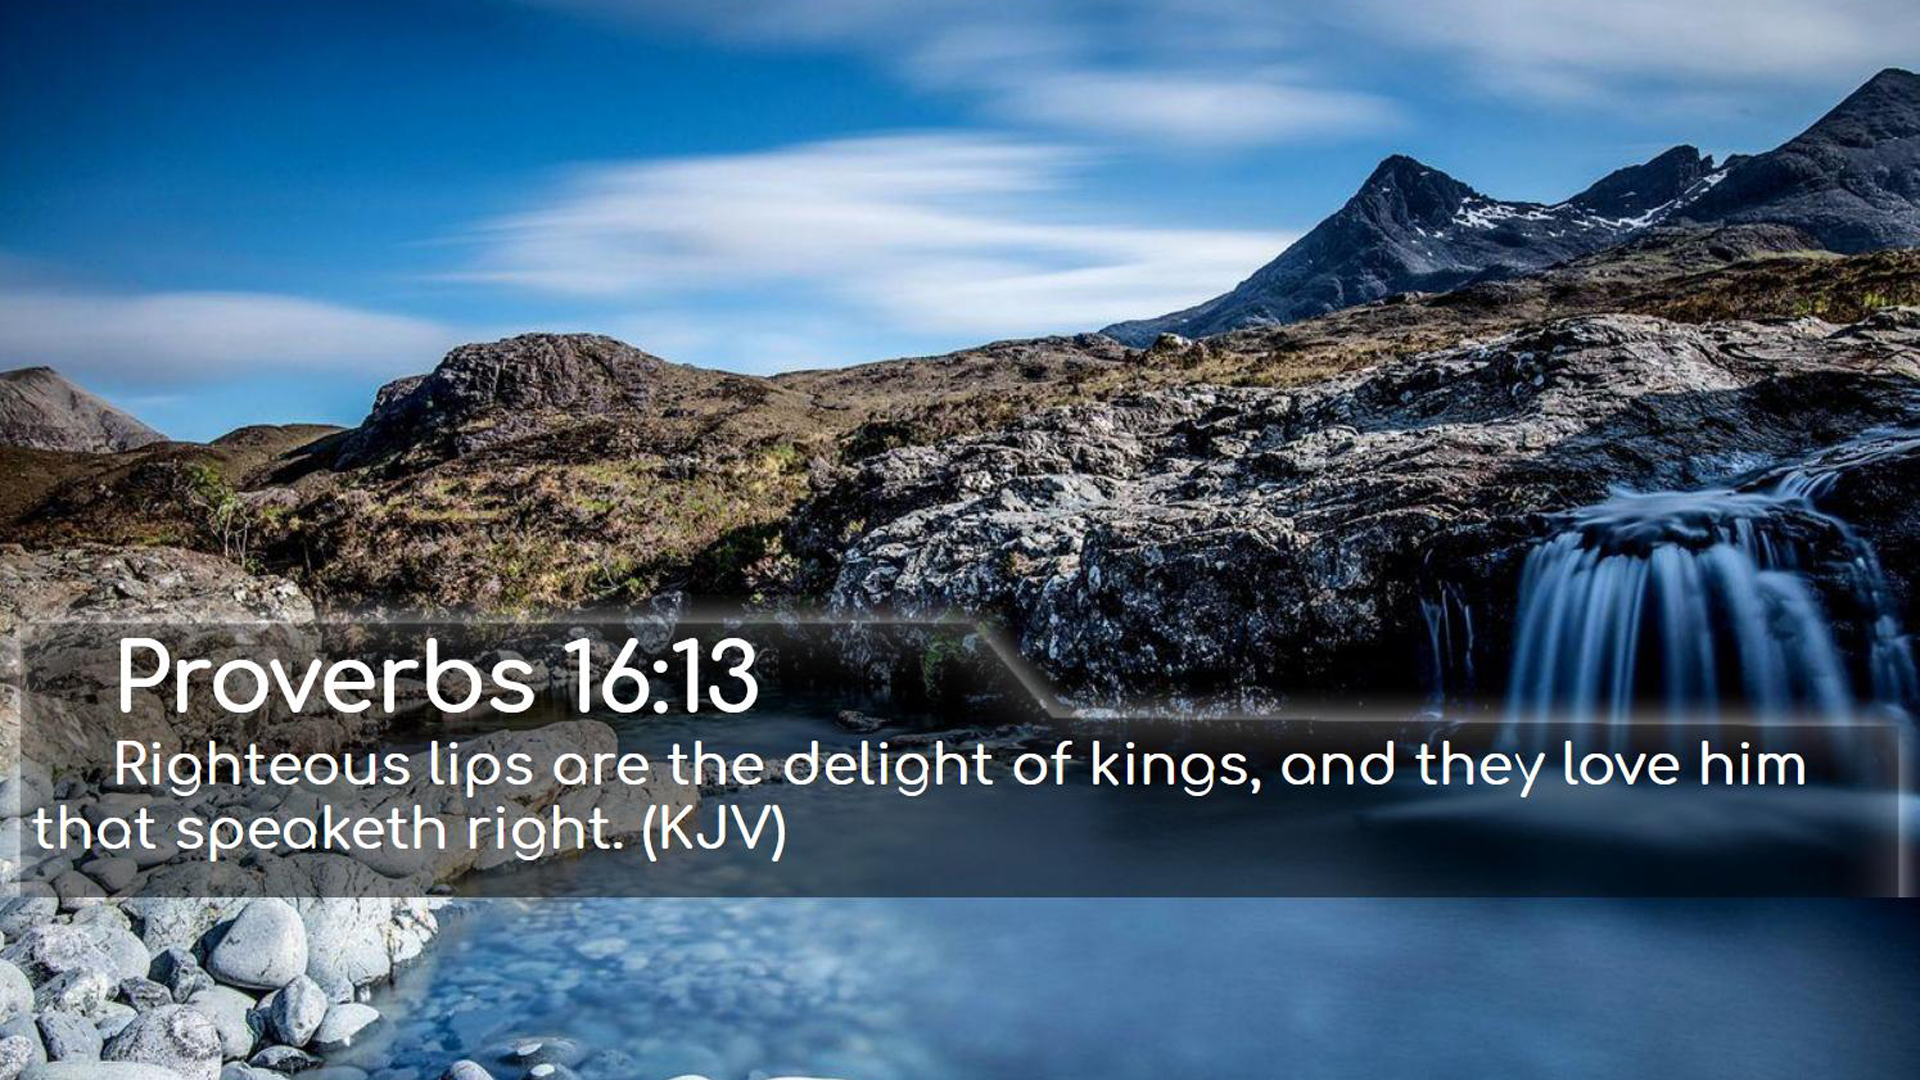 Righteous Lips Are The Delight Of Kings And They Love Him That Speaketh Right 2K Bible Verse